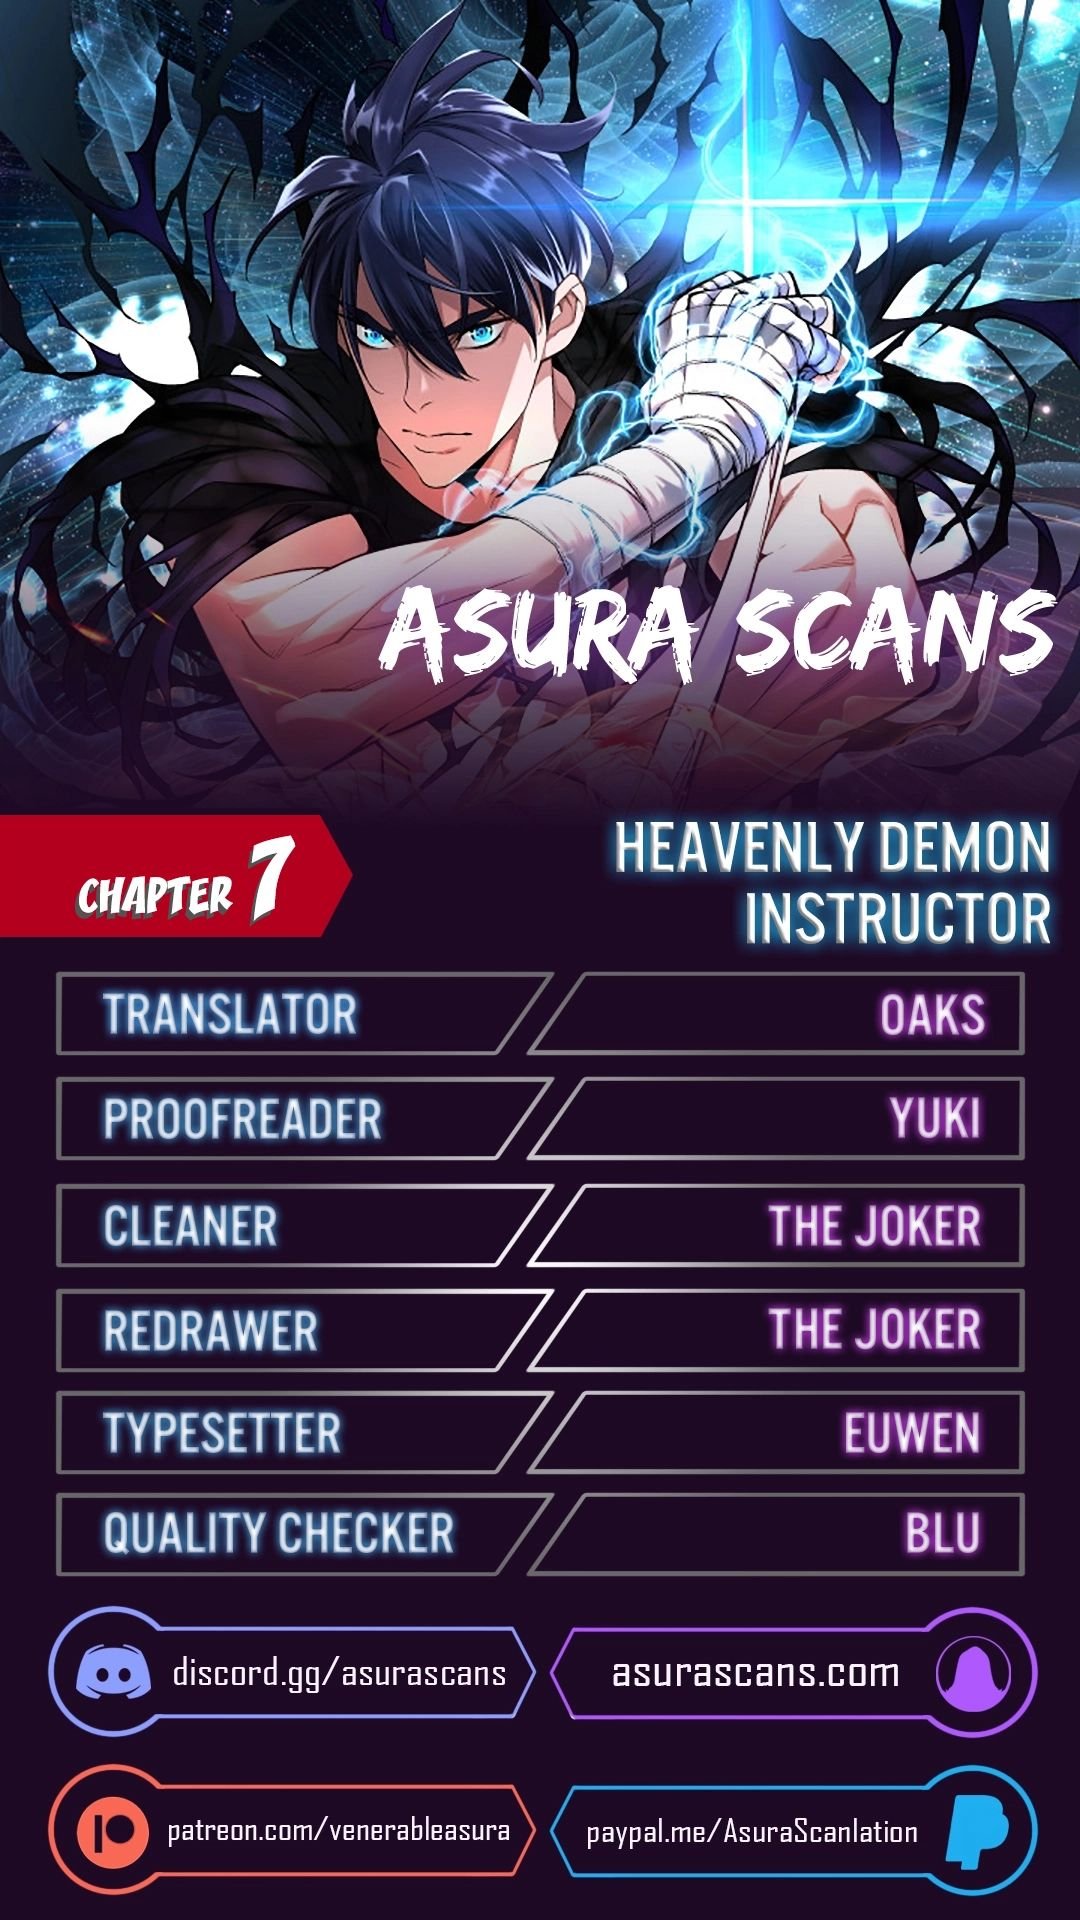 Heavenly Demon Instructor chapter 7